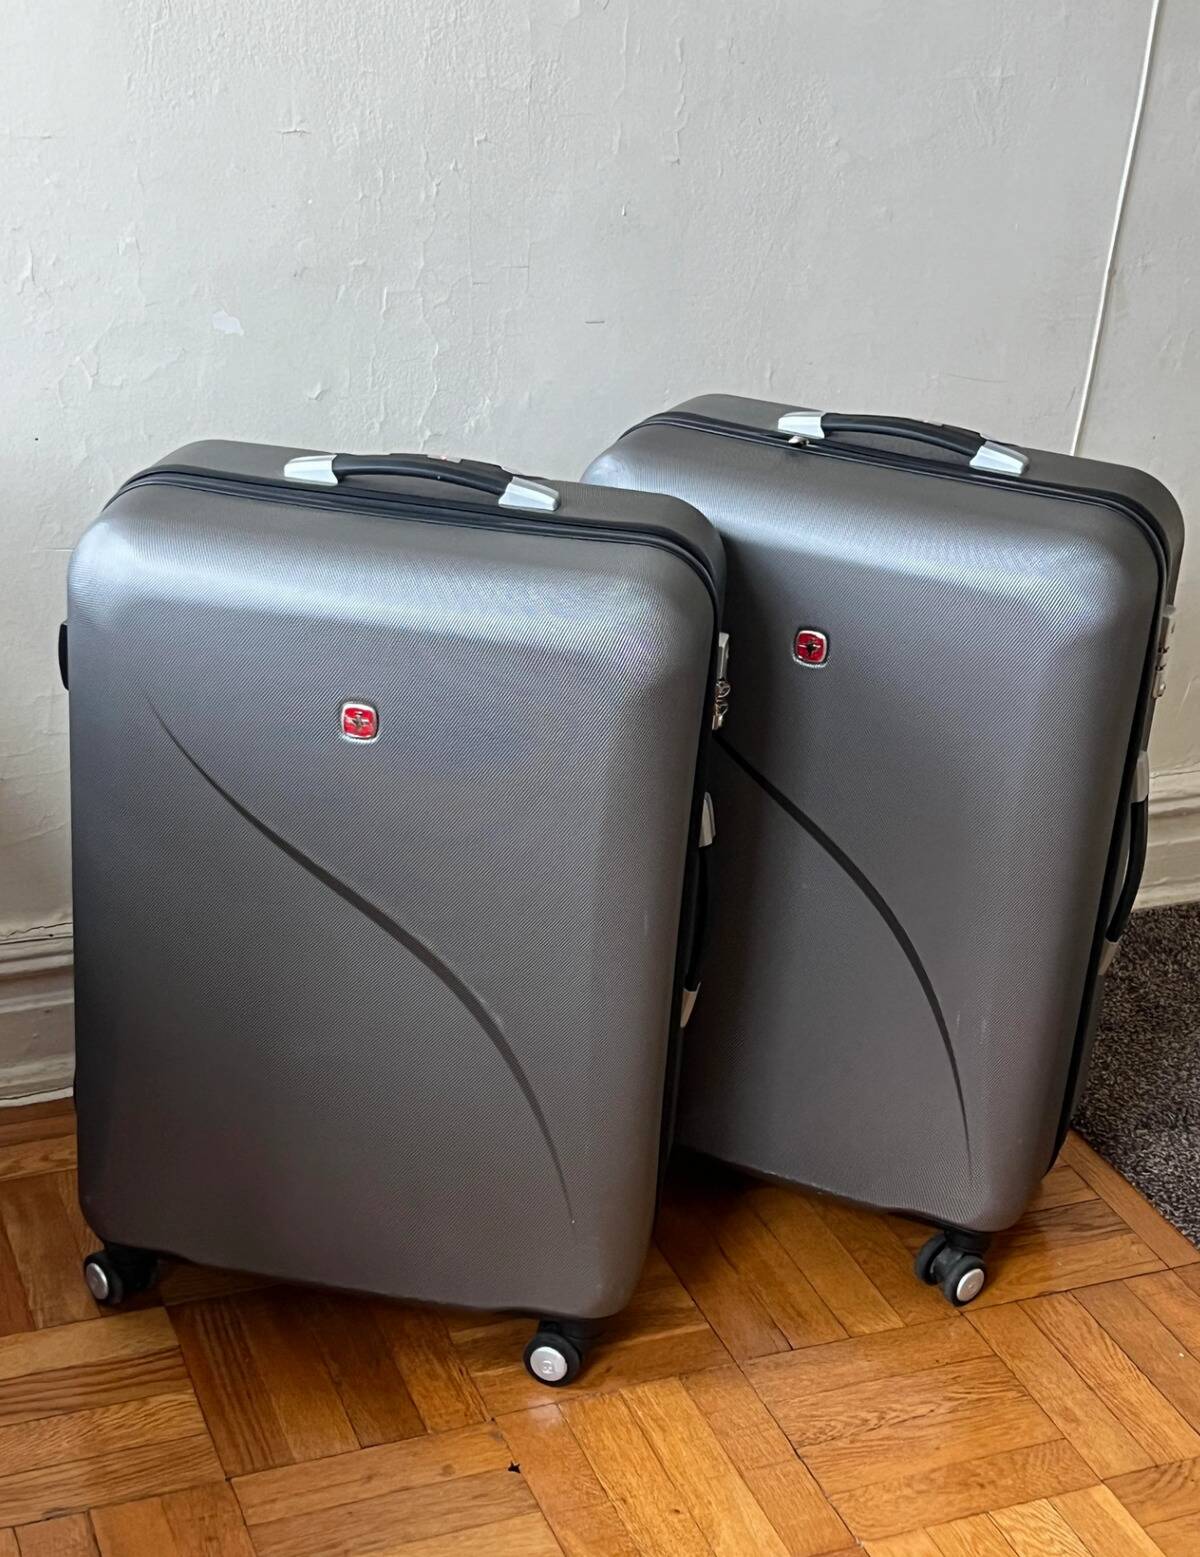 <p>Although <i>Expert World Travel</i> felt it would be misleading to call SwissGear's luggage the most high-quality product on the market, they nonetheless noted that people can do much worse at the brand's price point. There is also a range of options within the brand.</p> <p>For instance, someone could spend about $120 to get a suitcase coated in ABS plastic for more affordable travel. However, those who aren't willing to take the risk that this will hold during handling can spring for a much more durable polycarbonate case for $180.</p>